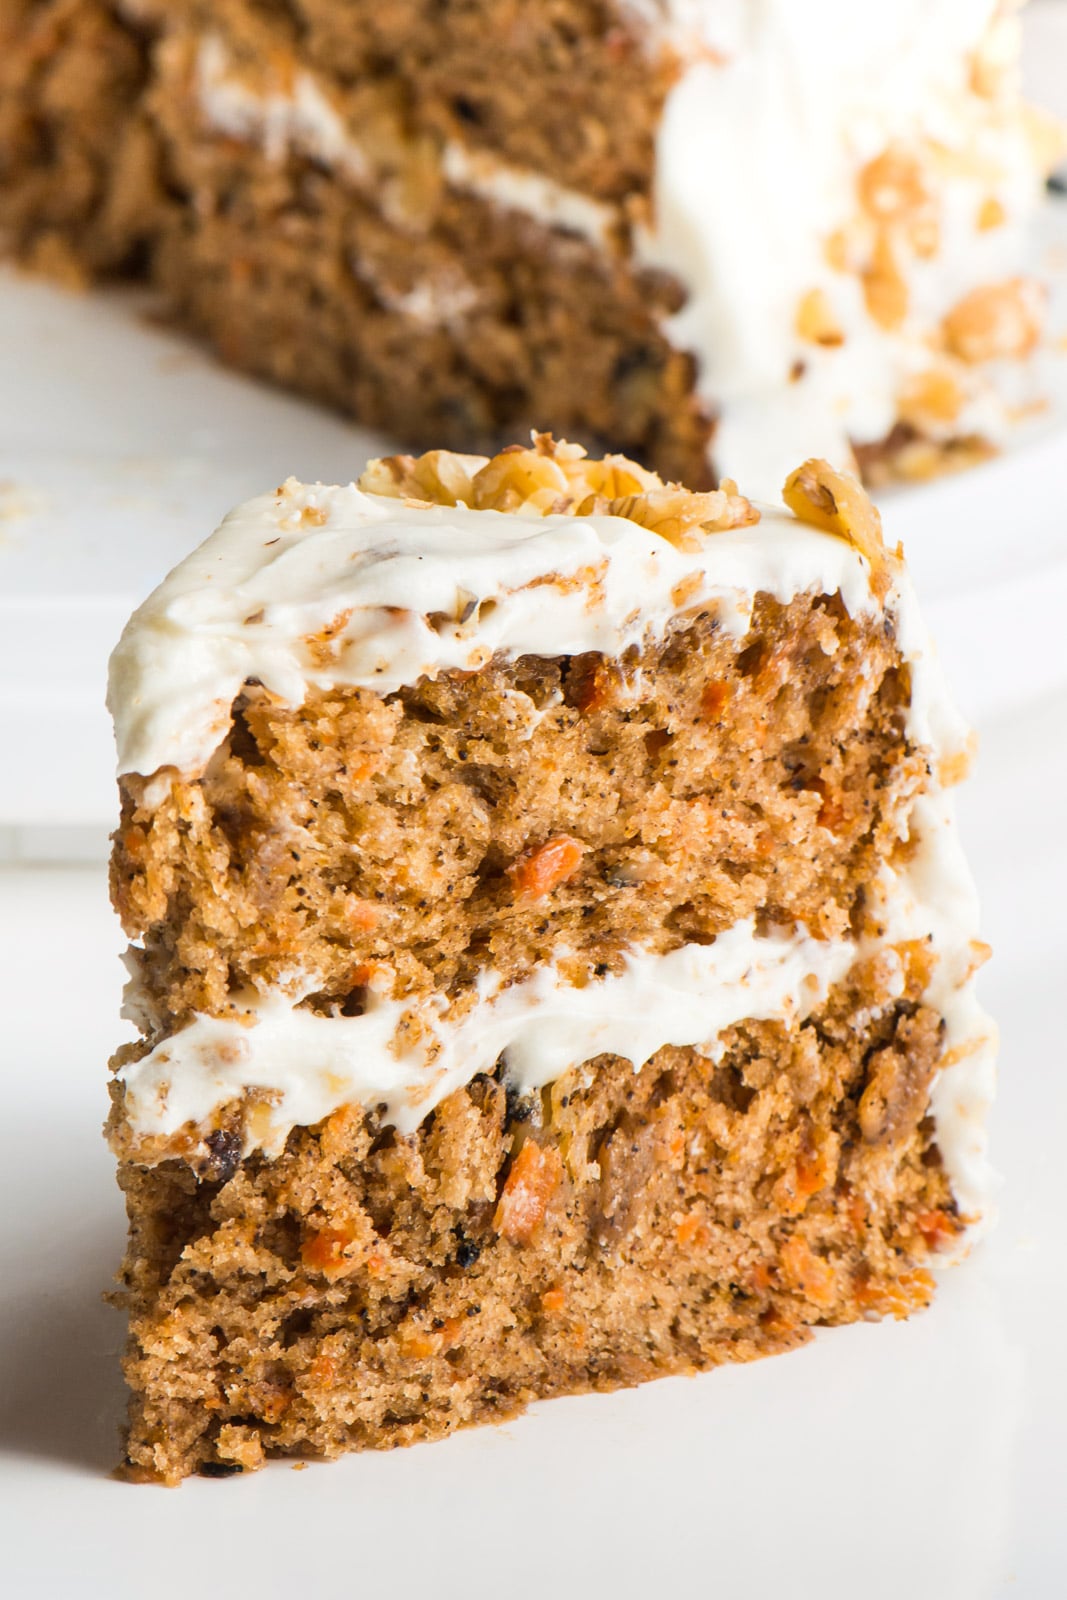 A slice of Vegan Carrot Cake sits in front of the rest of the cake.